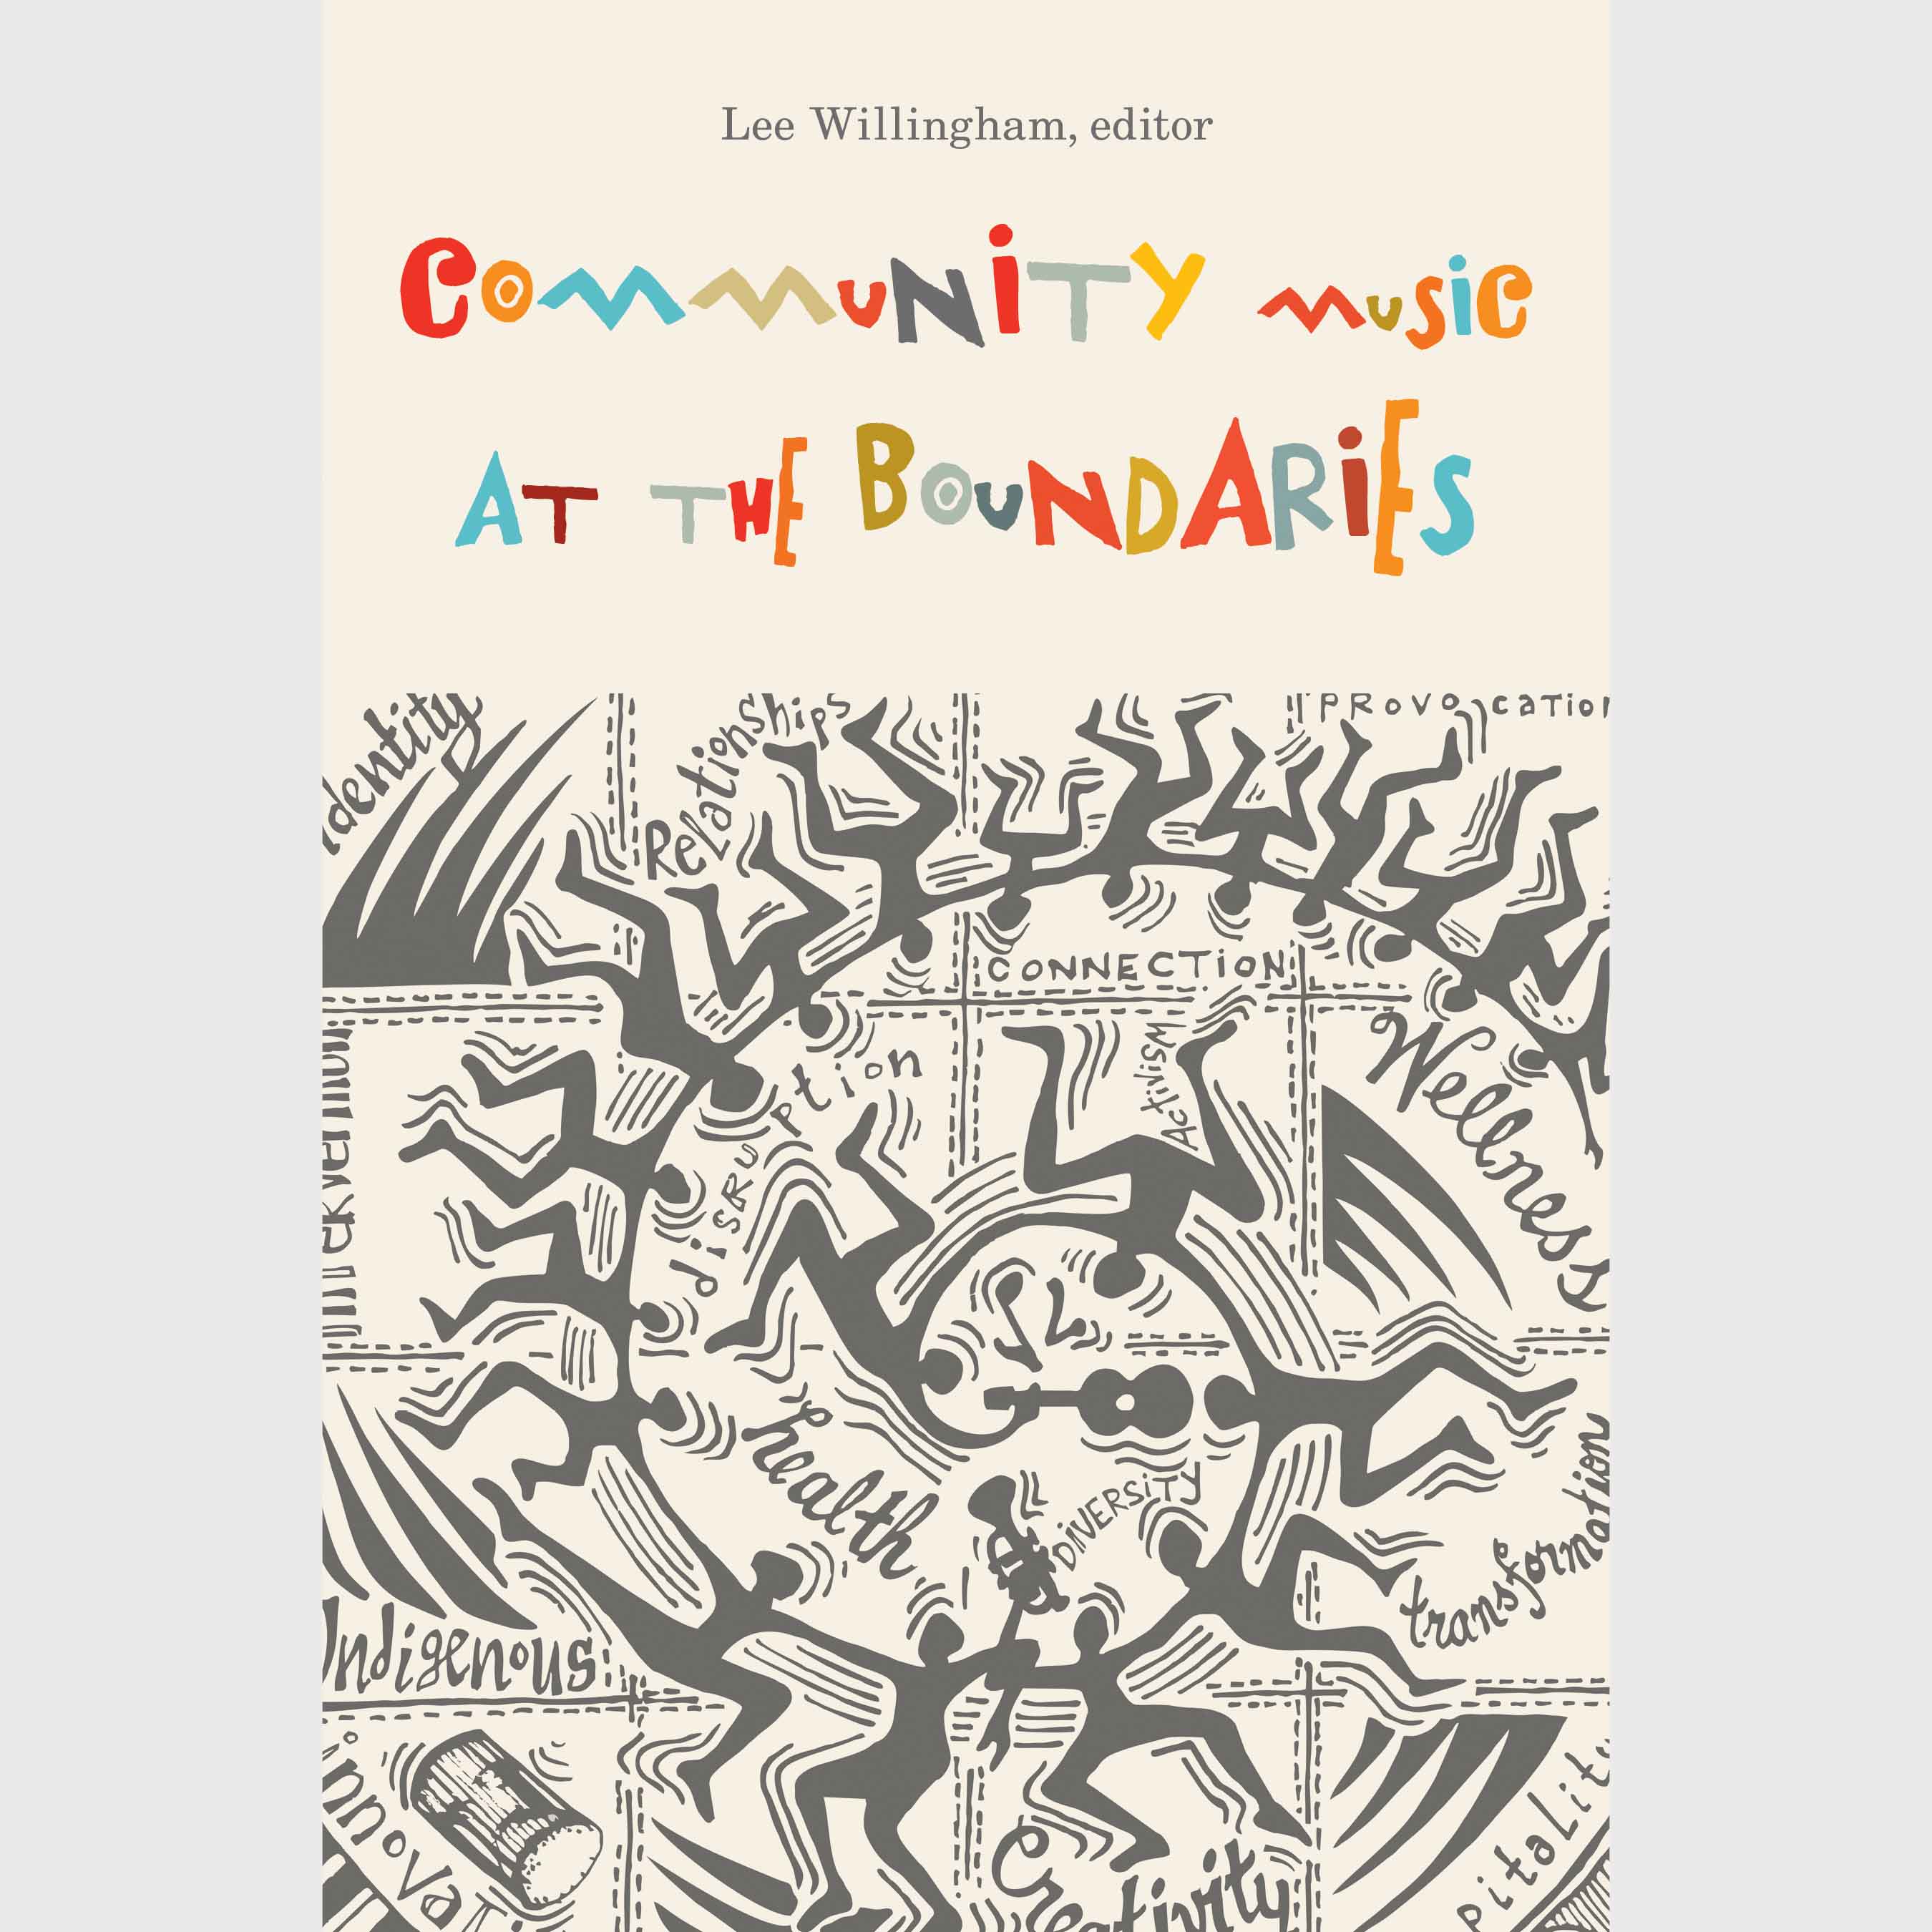 WLU Press, Laurier’s Faculty of Music celebrate Community Music at the Boundaries with book launch event 